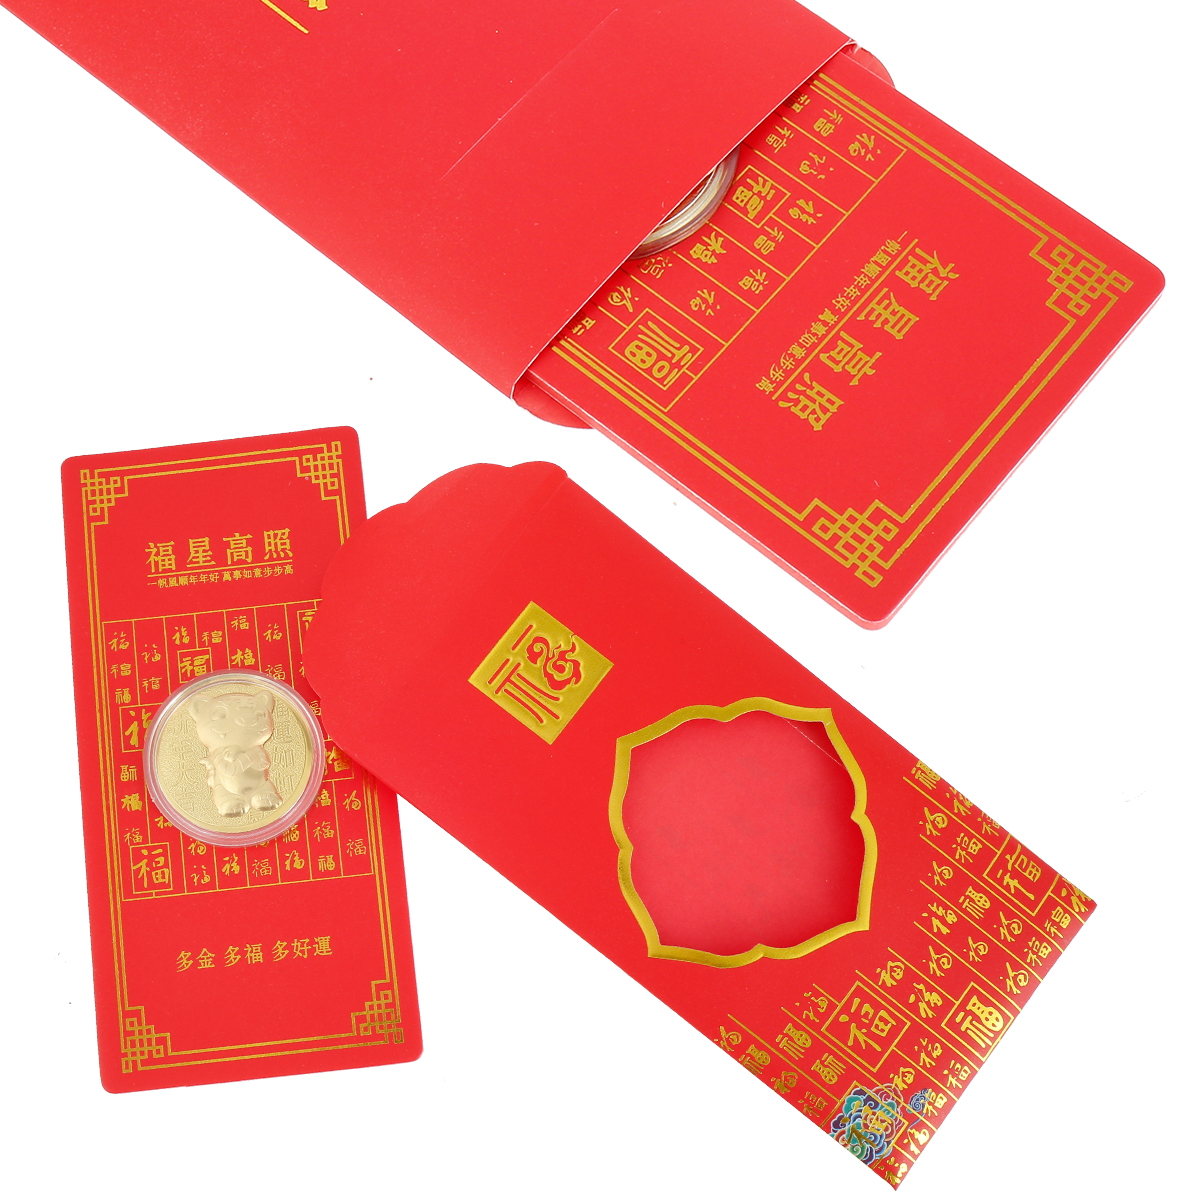 COMONS Chinese Red Envelopes Lucky Money Hongbao Red Packets Lai See Cash Pockets for Chinese New Year 2023 Spring Festival(DaJiDaLi, 24pc)